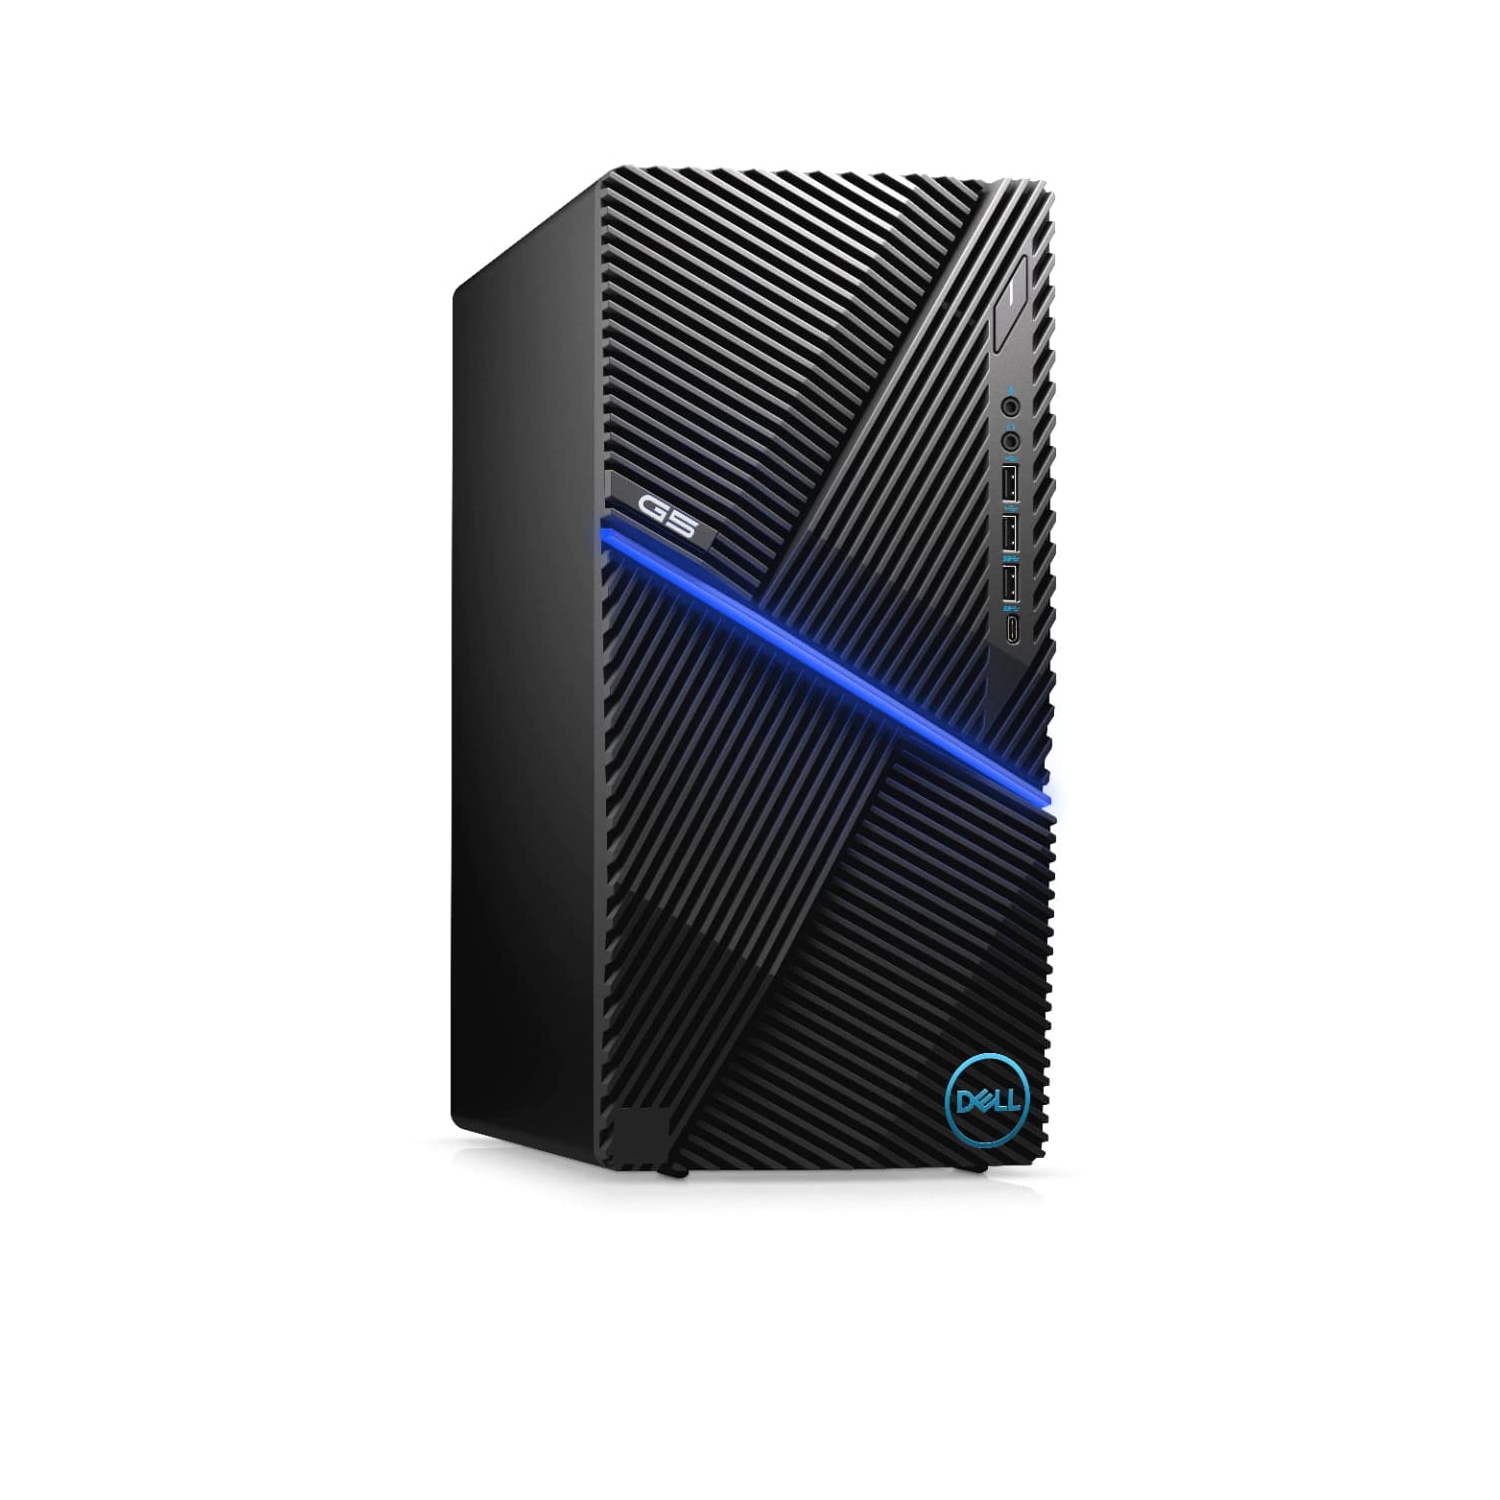 Refurbished (Excellent) - Dell G5 5000 Gaming Desktop (2020), Core i7 - 2TB HDD + 256GB SSD - 32GB RAM - GTX 1660, 8 Cores @ 5.1 GHz - 10th Gen CPU Certified Refurbished